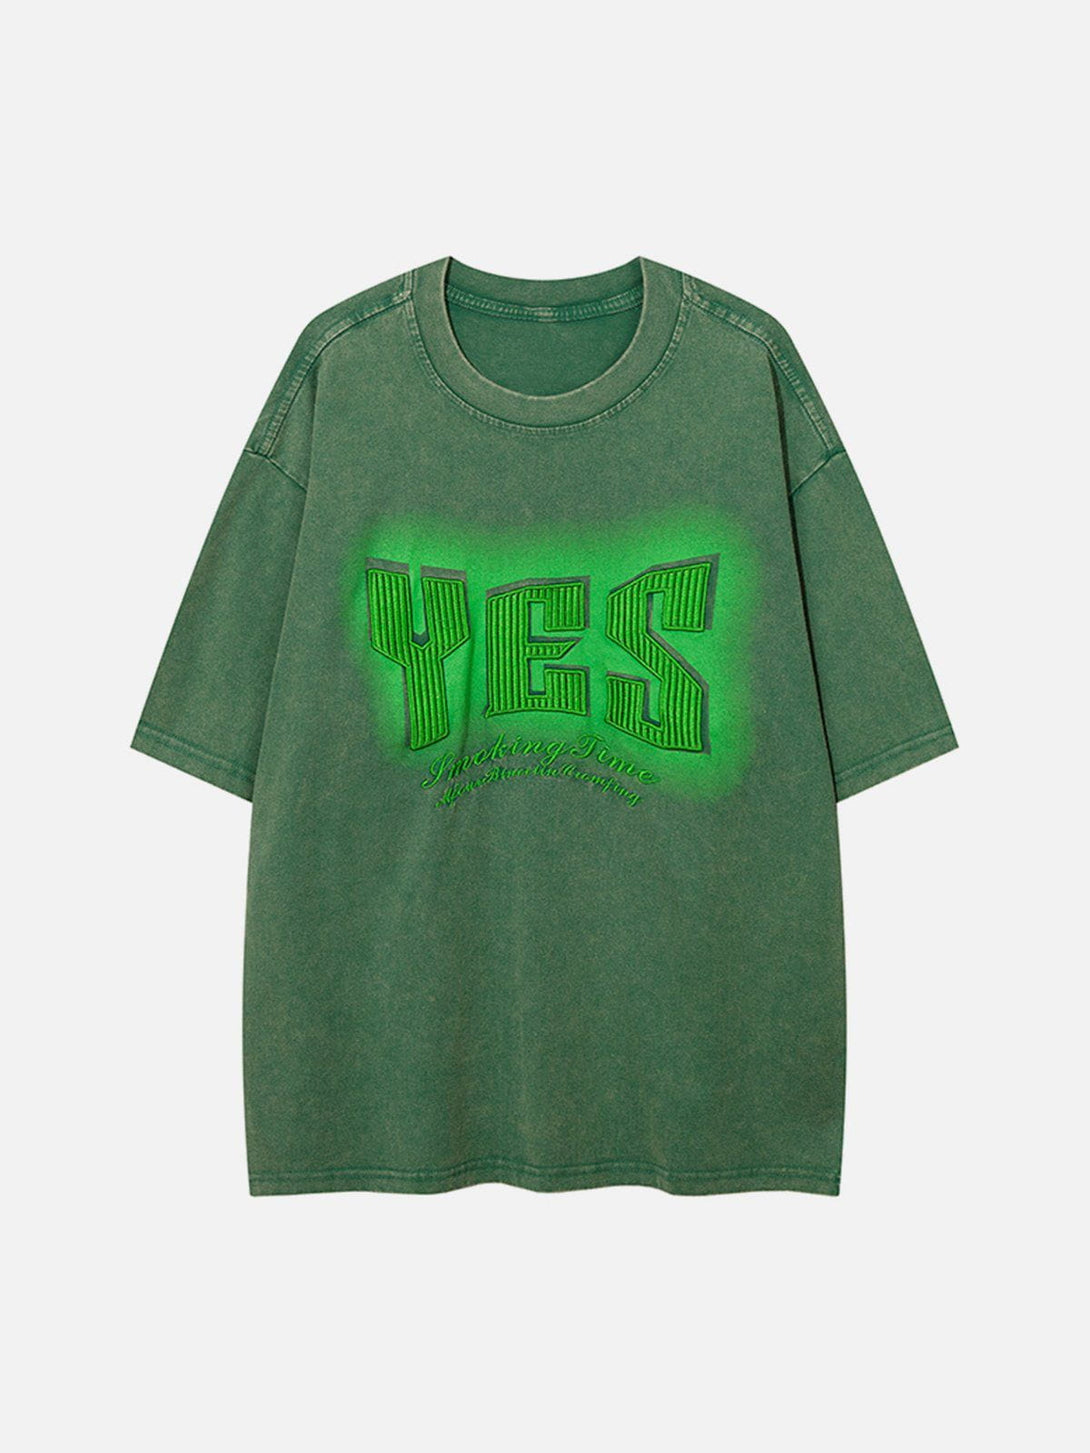 Ellesey - Yes Print Washed Tee- Streetwear Fashion - ellesey.com